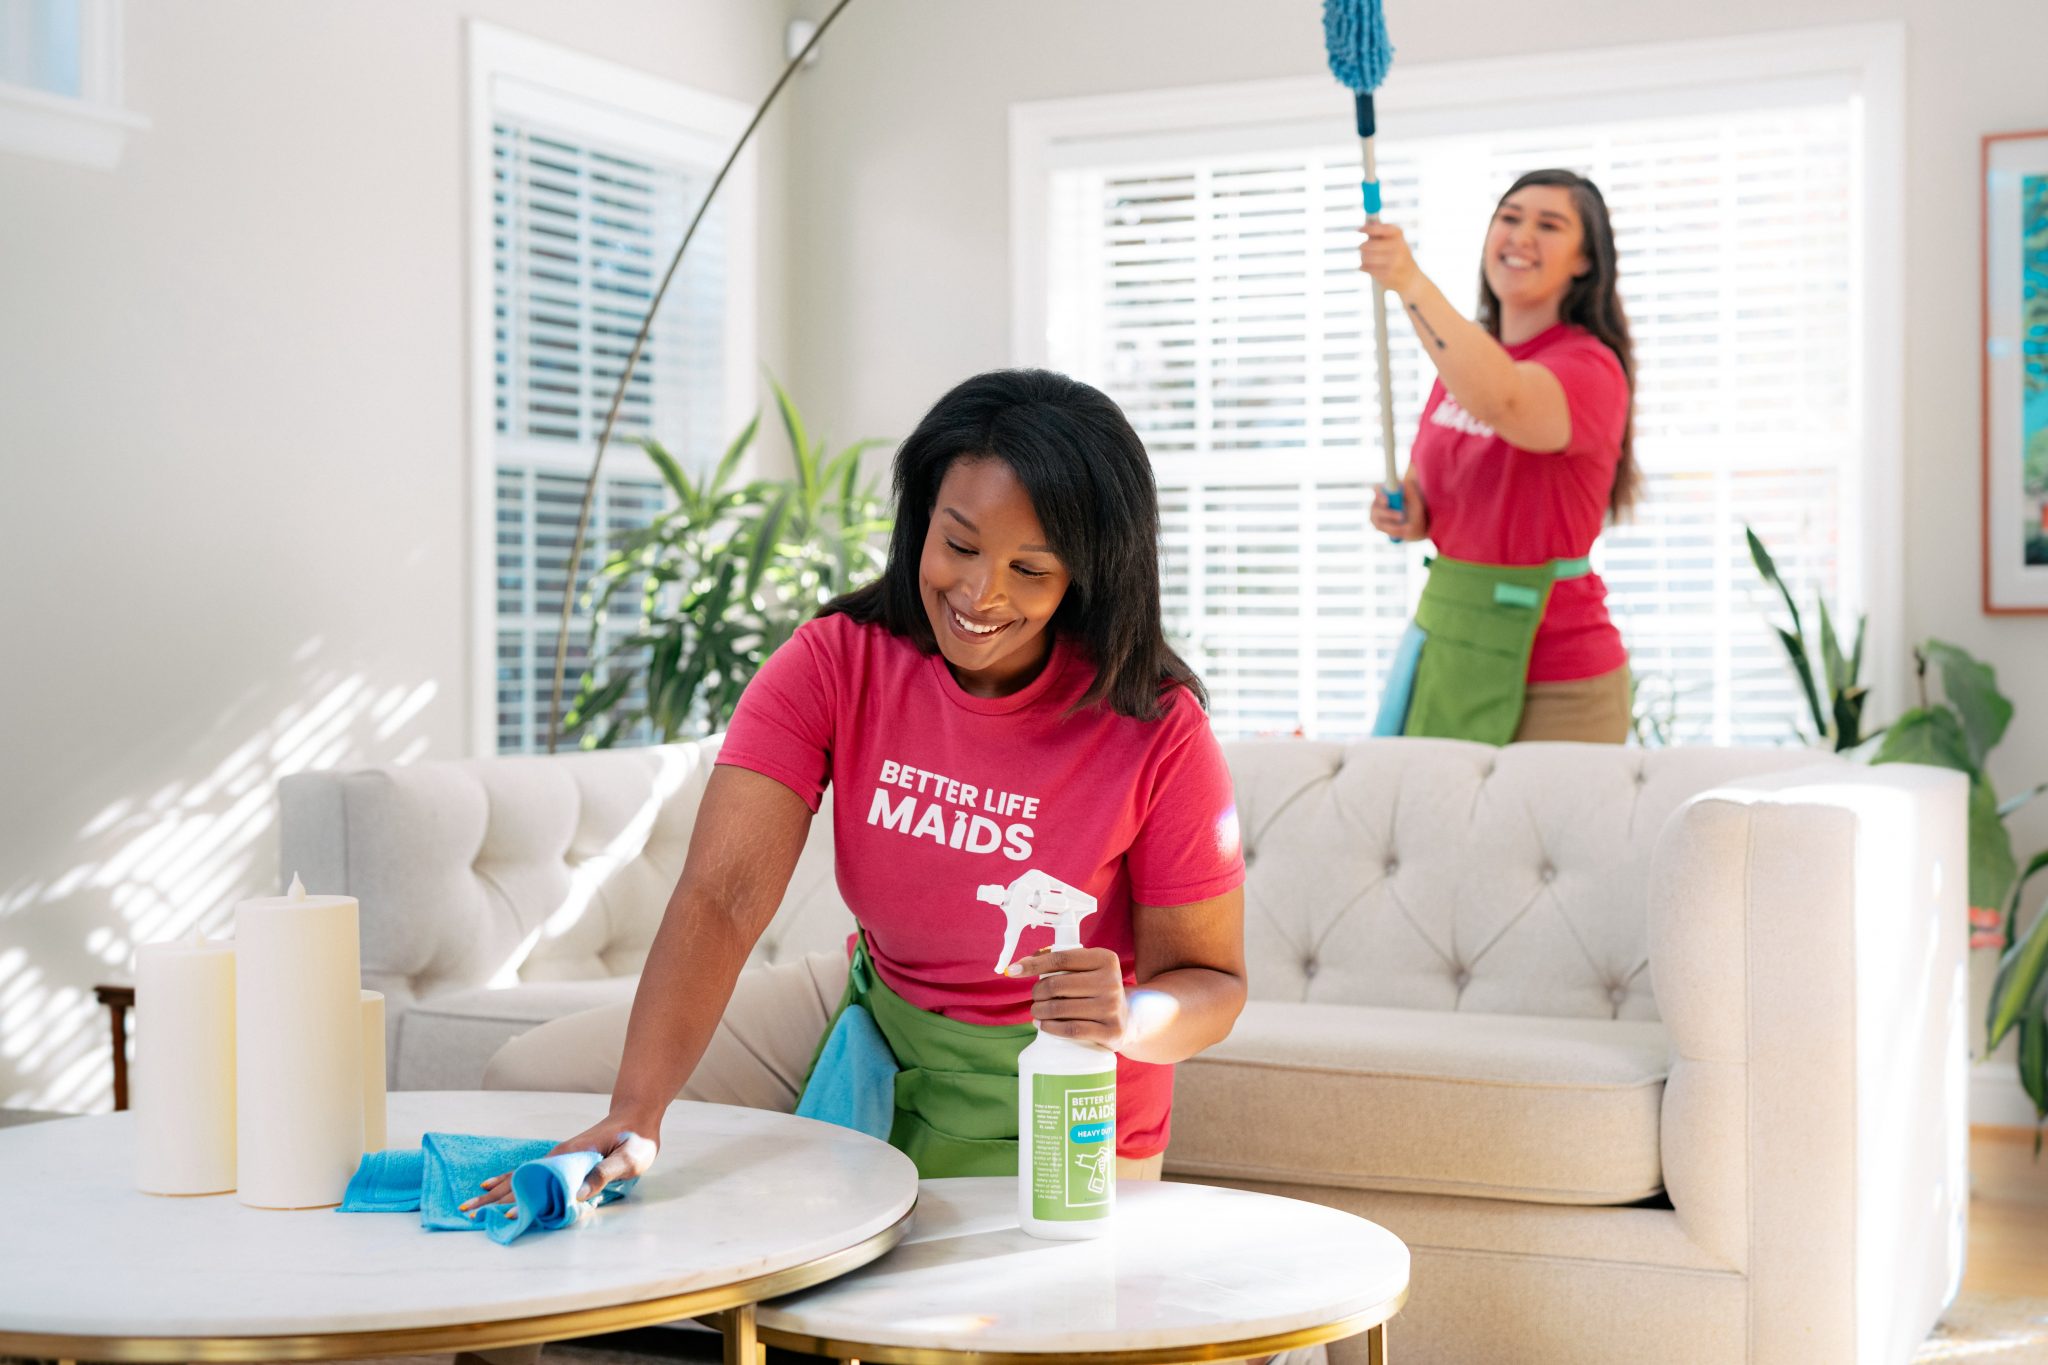 better life maids cleaning in brentwood, best maids in brentwood, cleaning companies near brentwood, cleaning company near me, amazing maids, best maids in brentwood, best cleaning service in brentwood mo